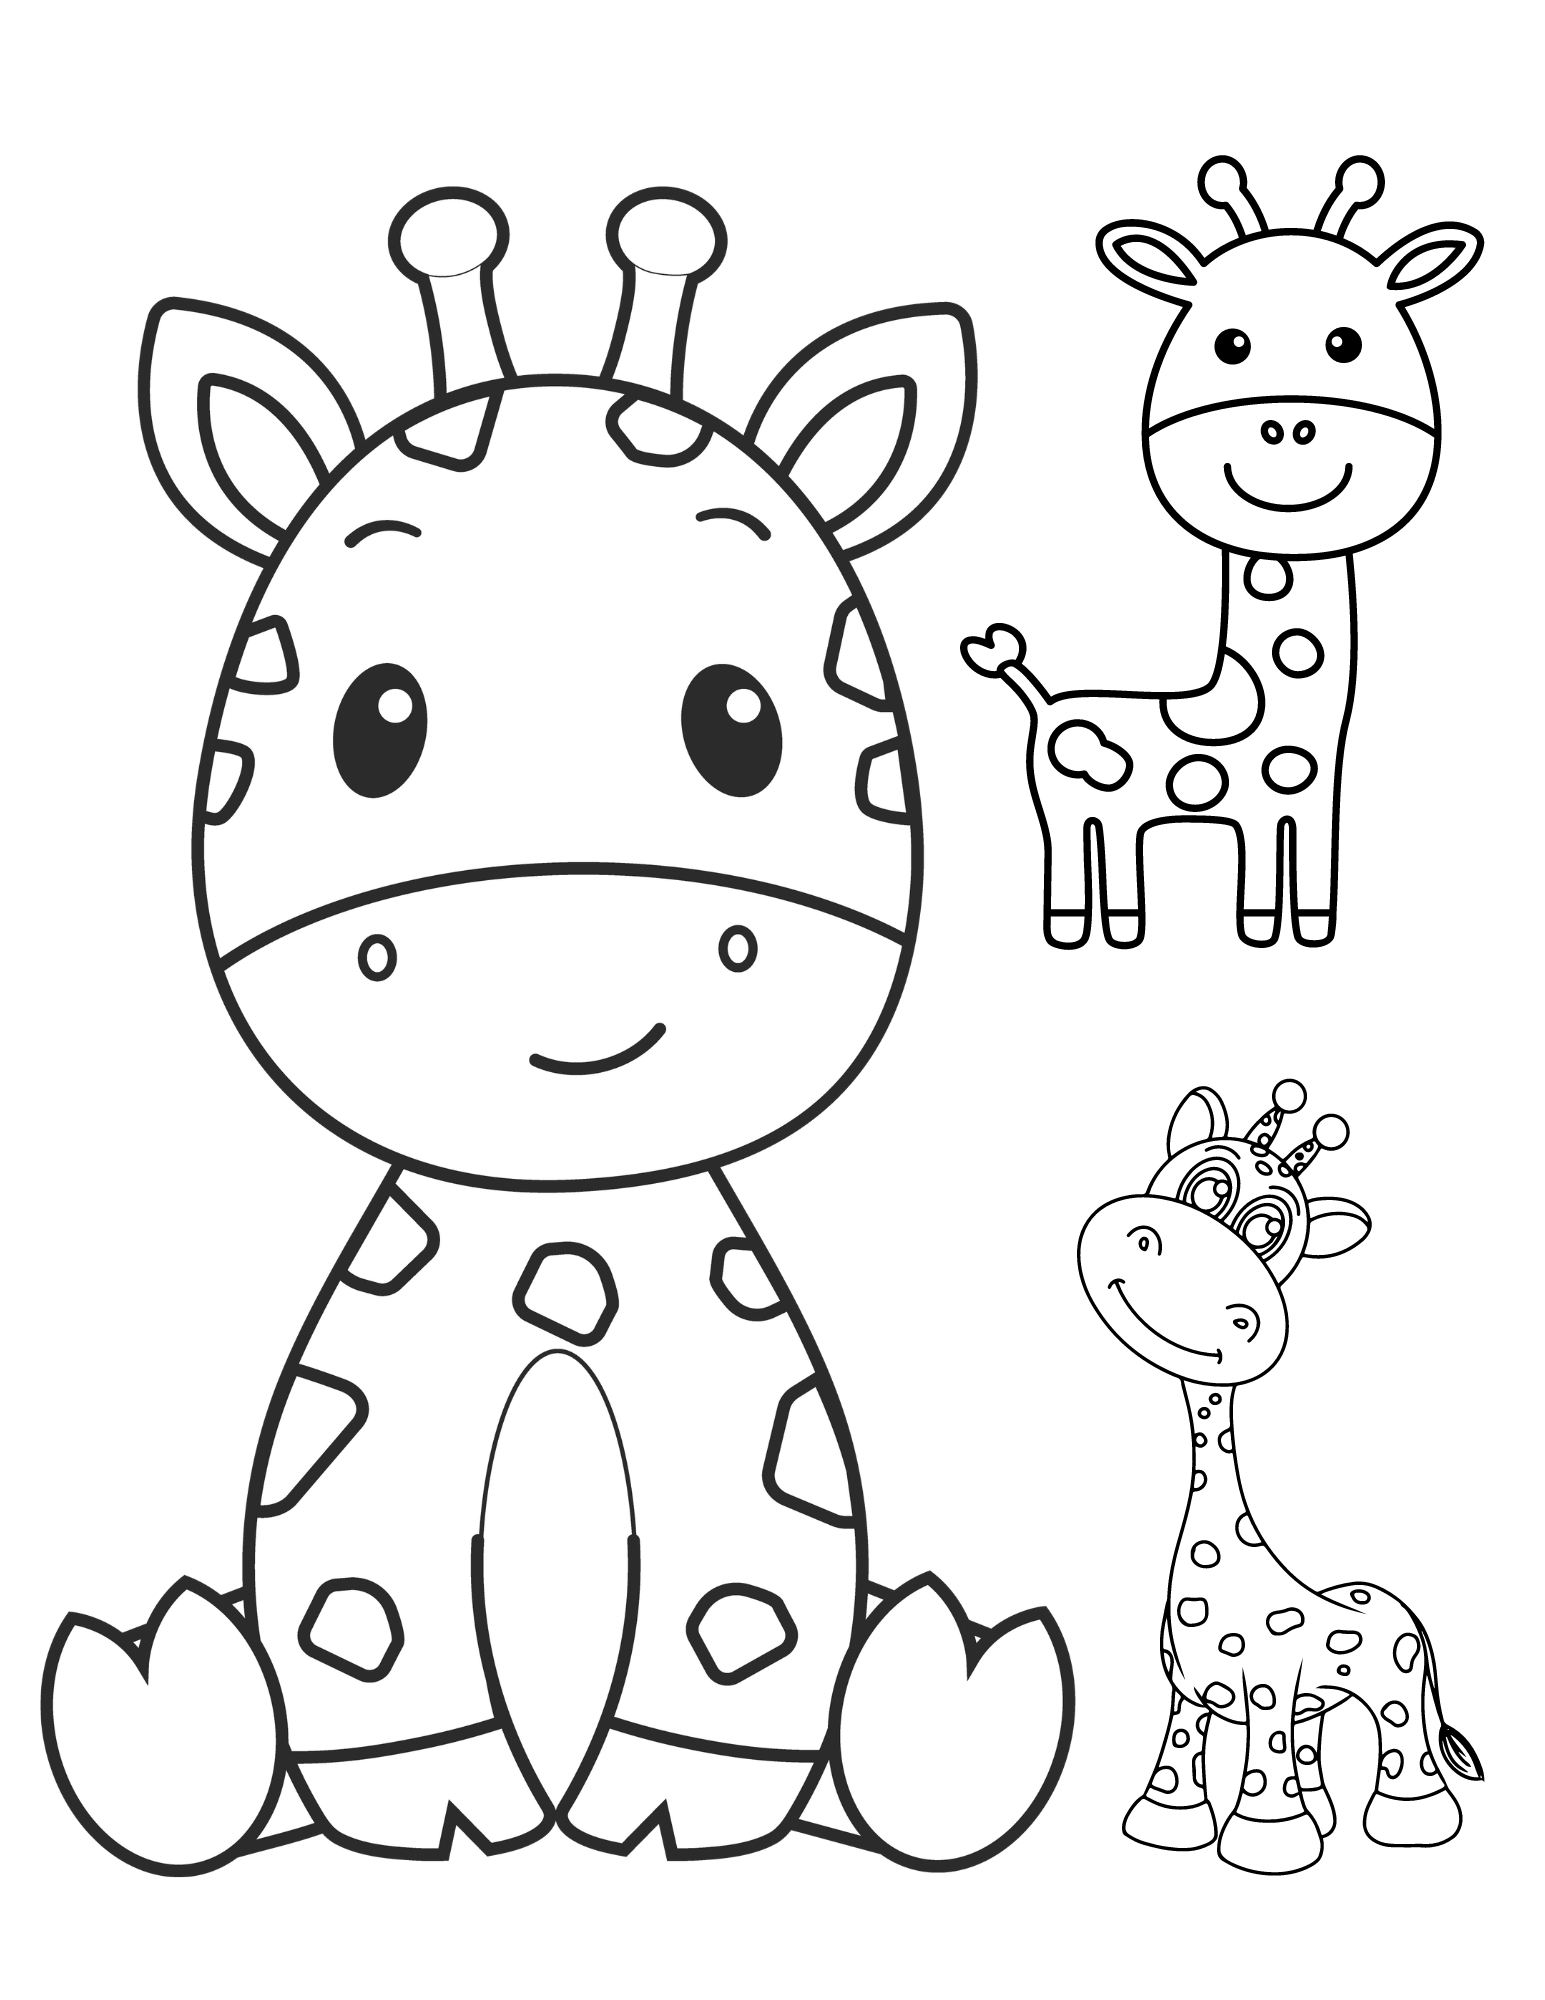 The best giraffe coloring pages for kids and adults